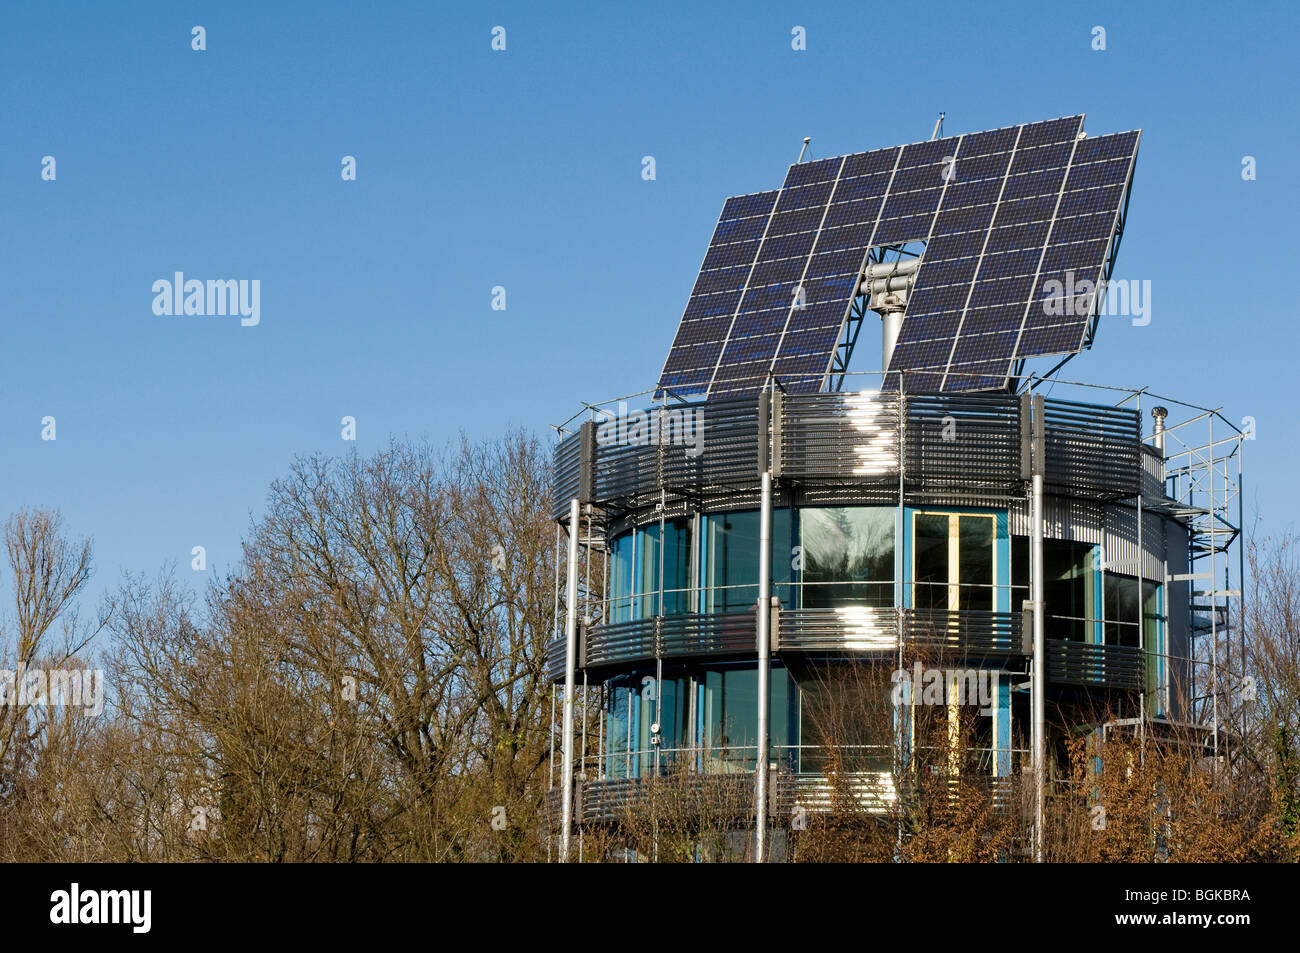 Roof with solar system, ecological Vauban district in Freiburg, Baden-Wuerttemberg, Germany, Europe Stock Photo